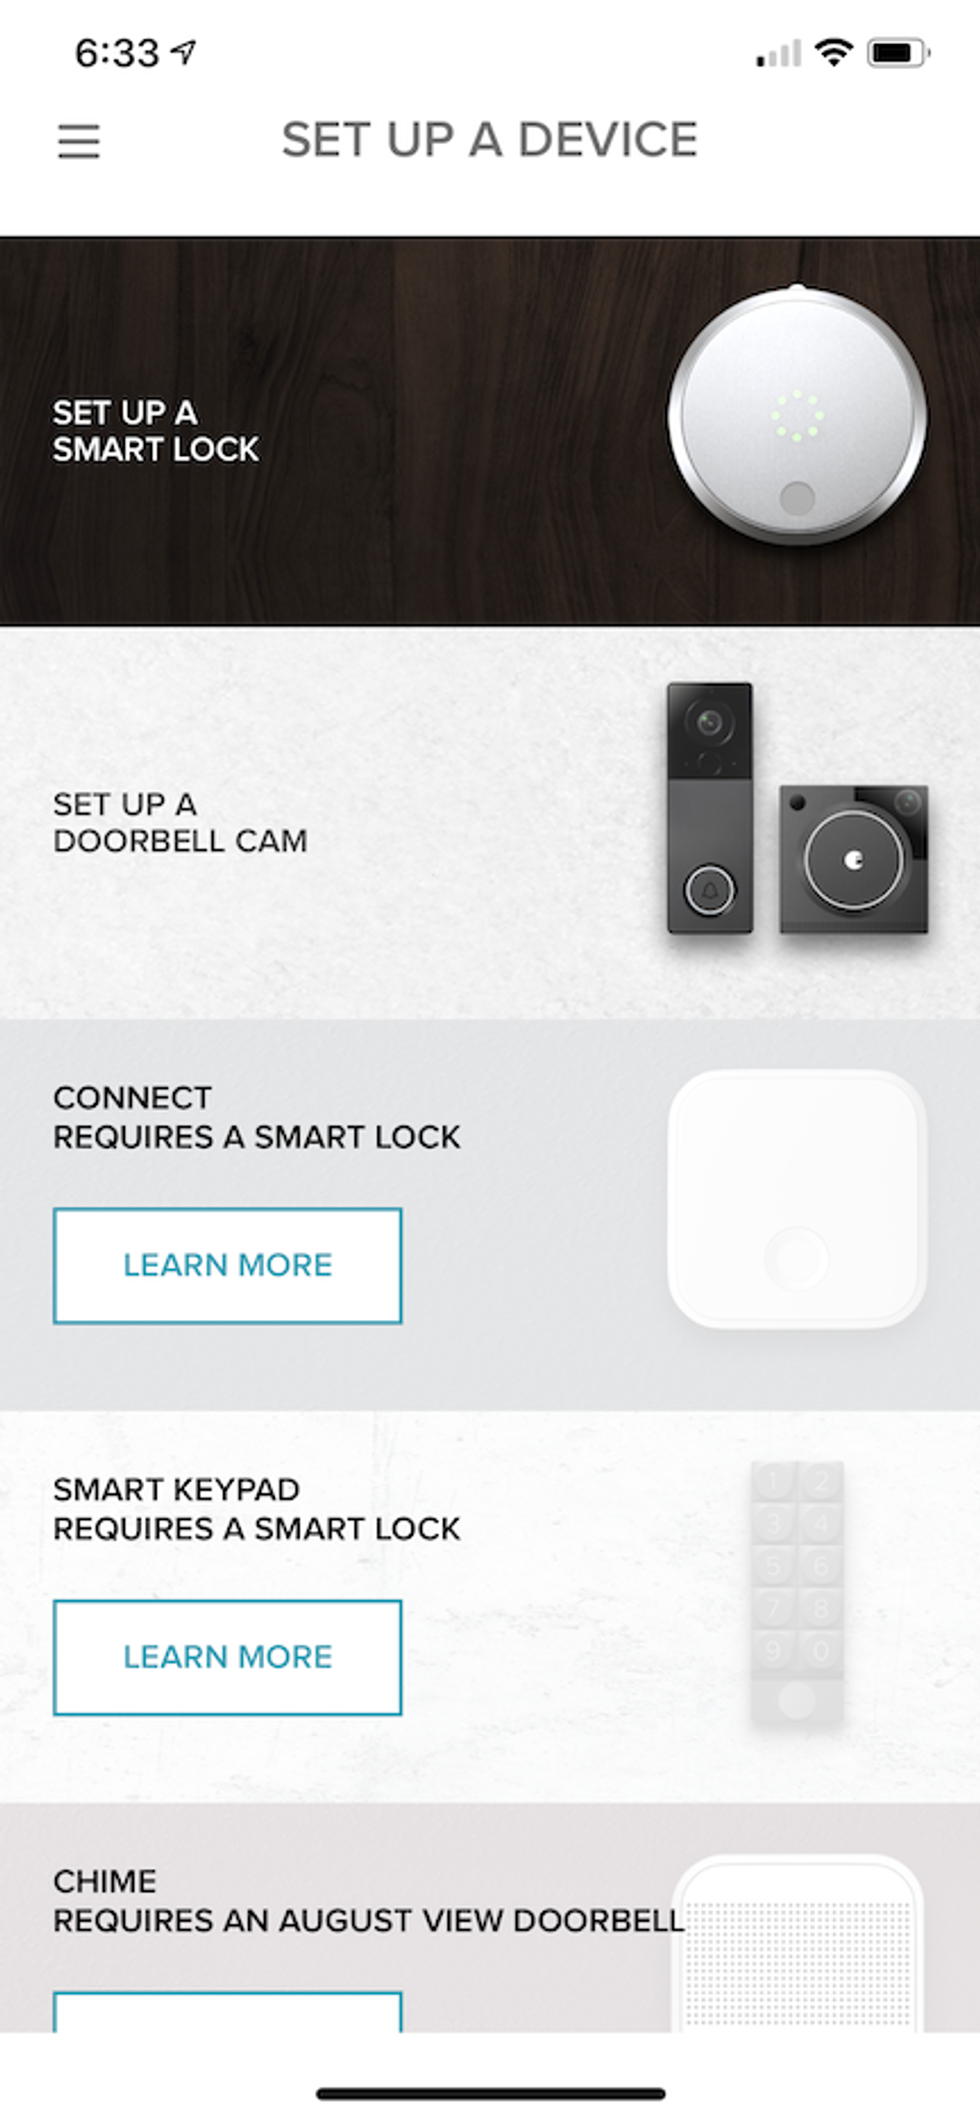 A photo of the app, with the "Set up a Smart Lock" option which is not the correct selection